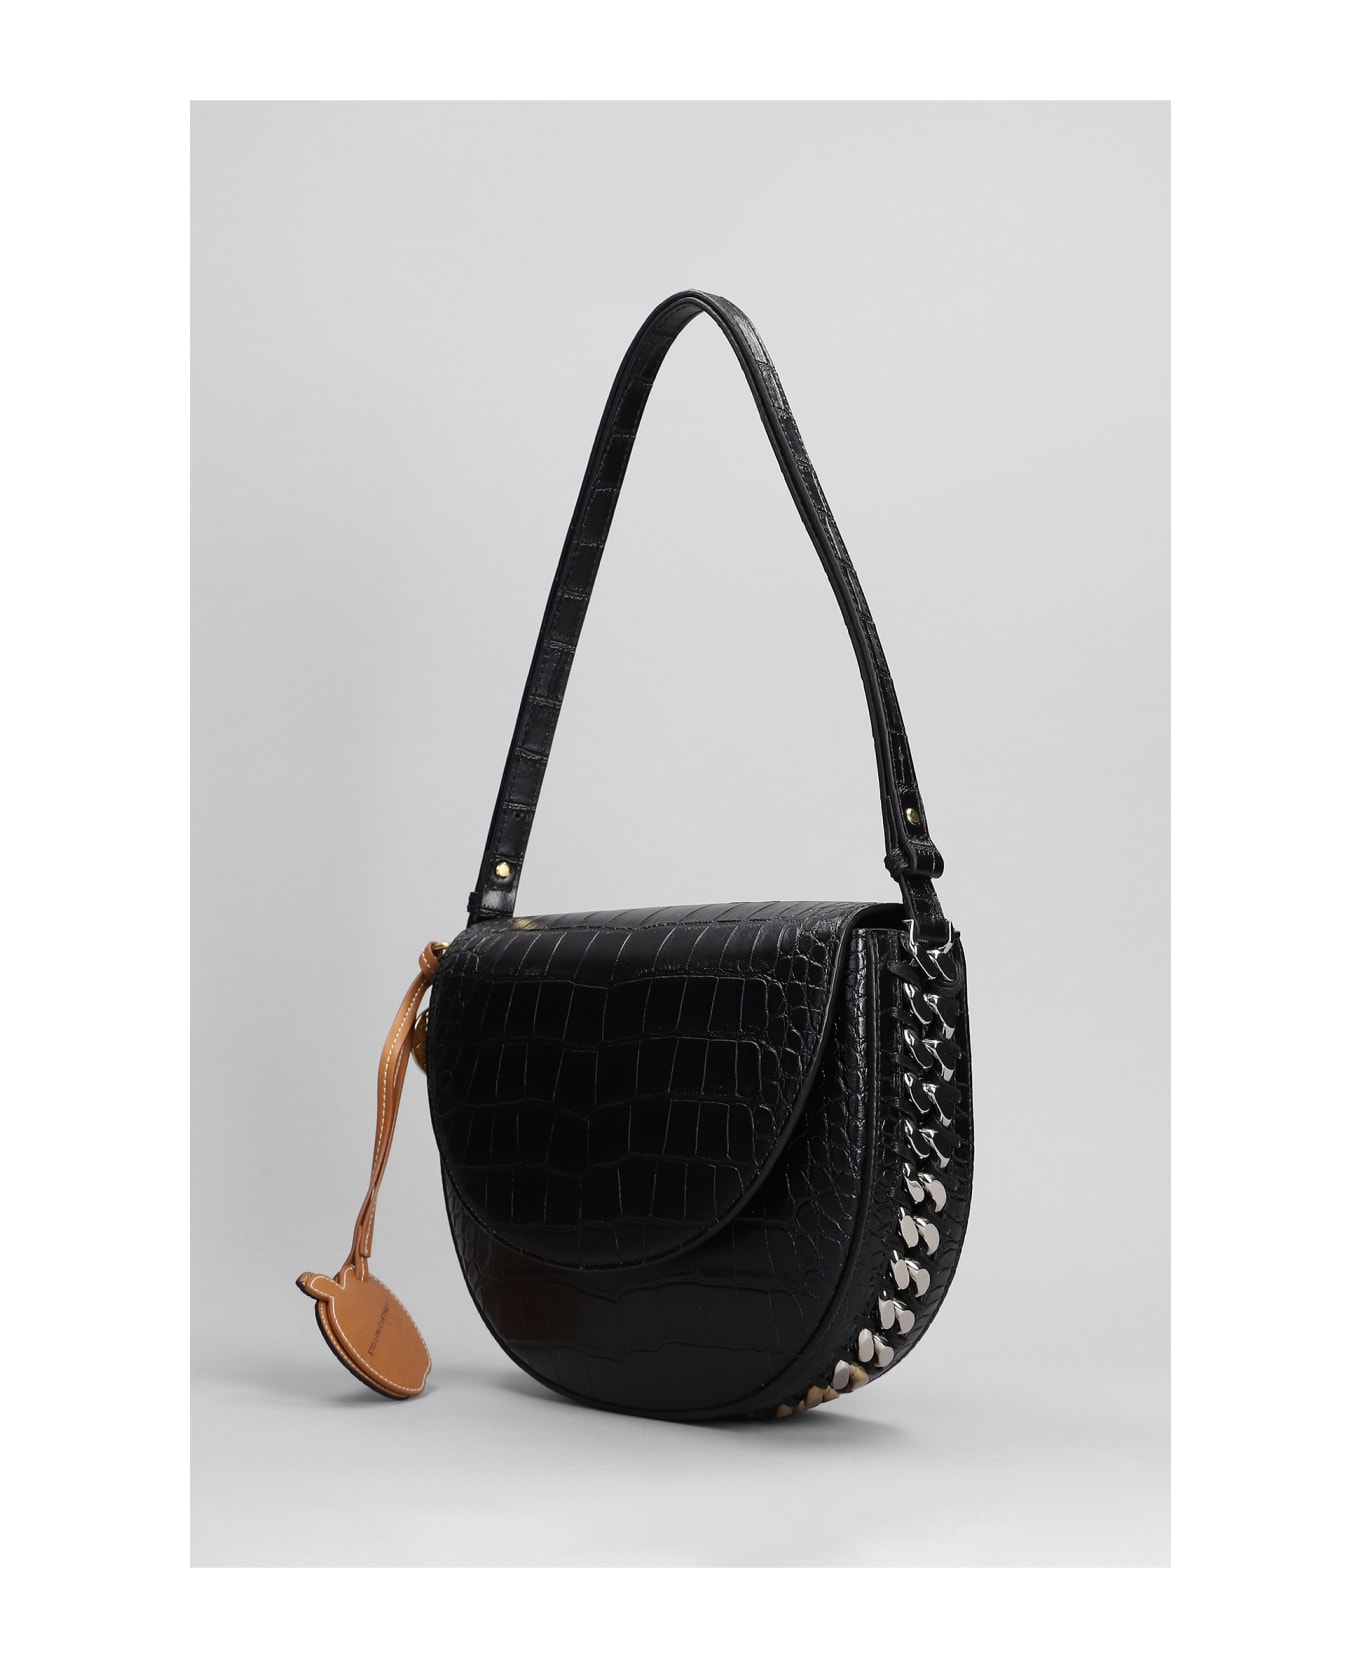 Stella McCartney Tote In Black Faux Leather - black トートバッグ